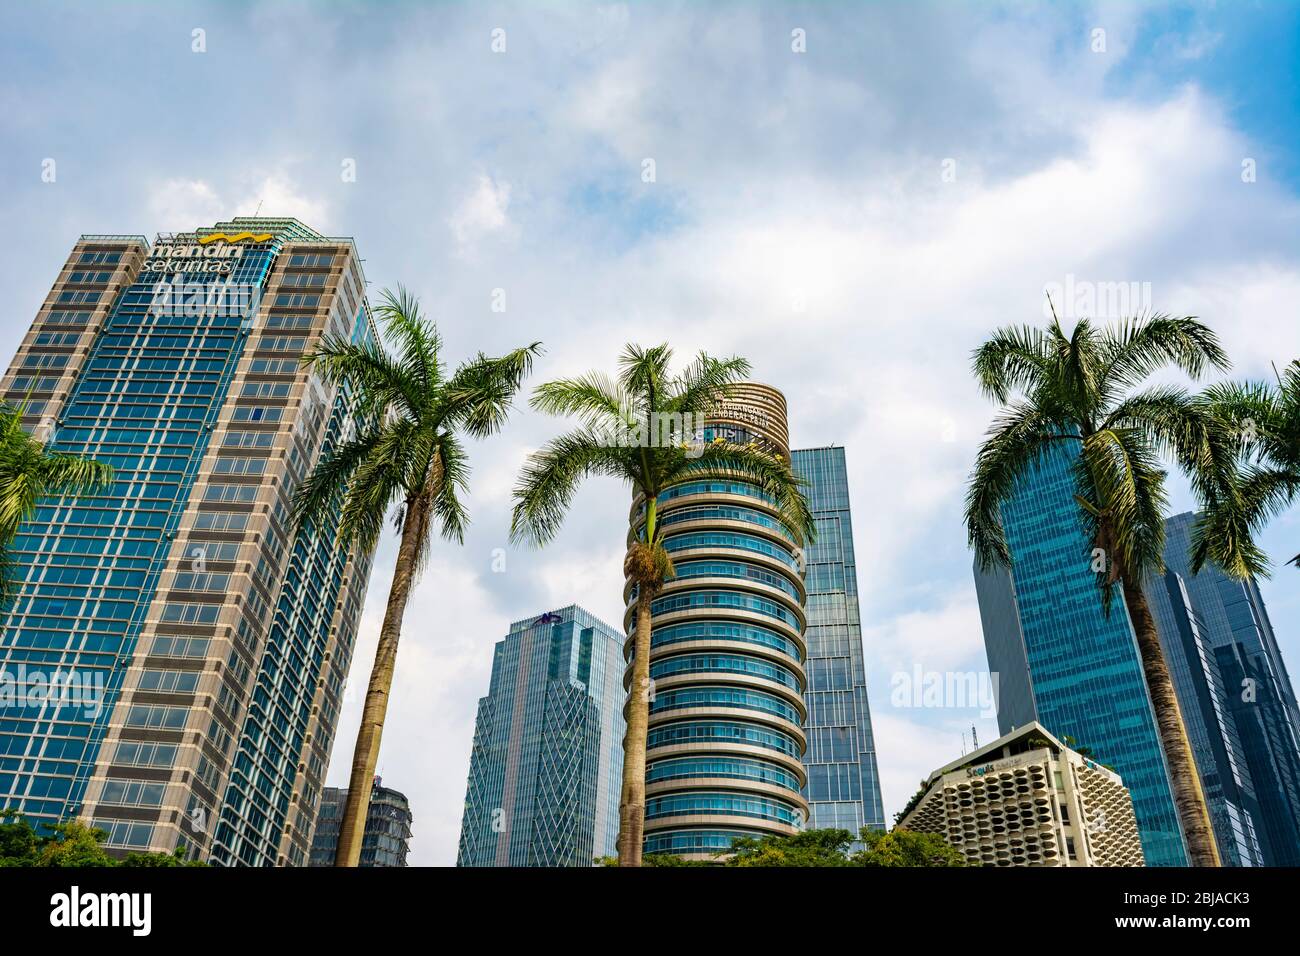 Buildings in Sudirman, which is Central Business District of Jakarta. There are banks, insurance, and ministry of finance buildings. Stock Photo